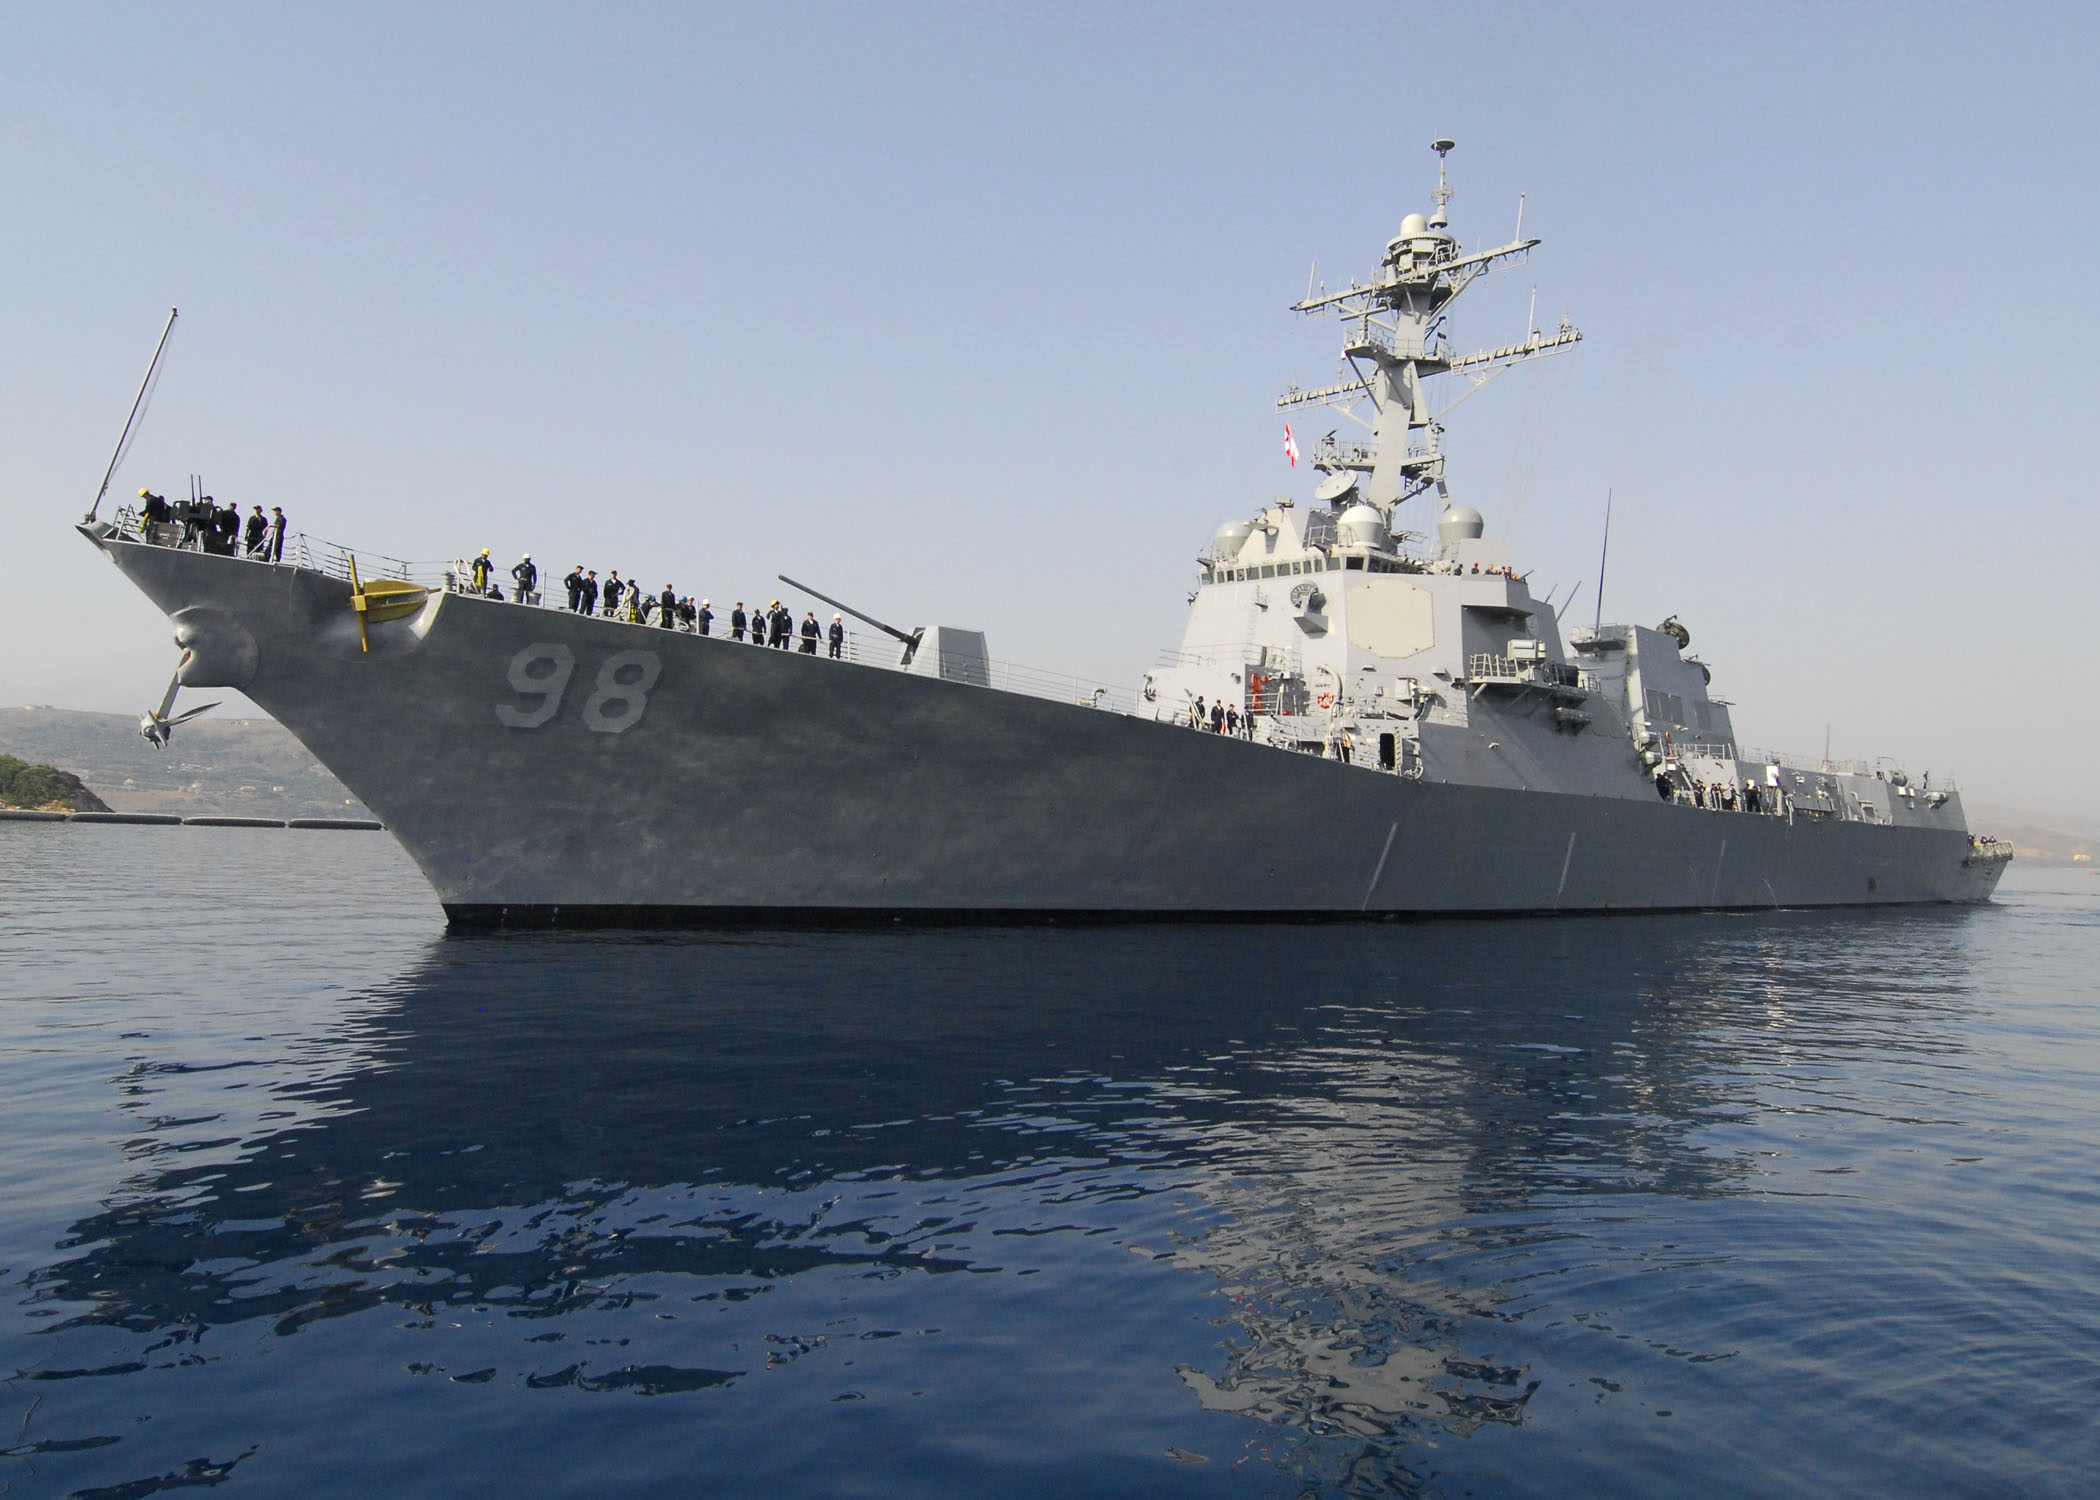 US_Navy_070725-N-0780F-002_Arleigh_Burke-class_guided-missile_destroyer_Forrest_Sherman_%28DDG_98%29_arrives_in_Greece_for_the_first_port_visit_of_her_maiden_deployment.jpg